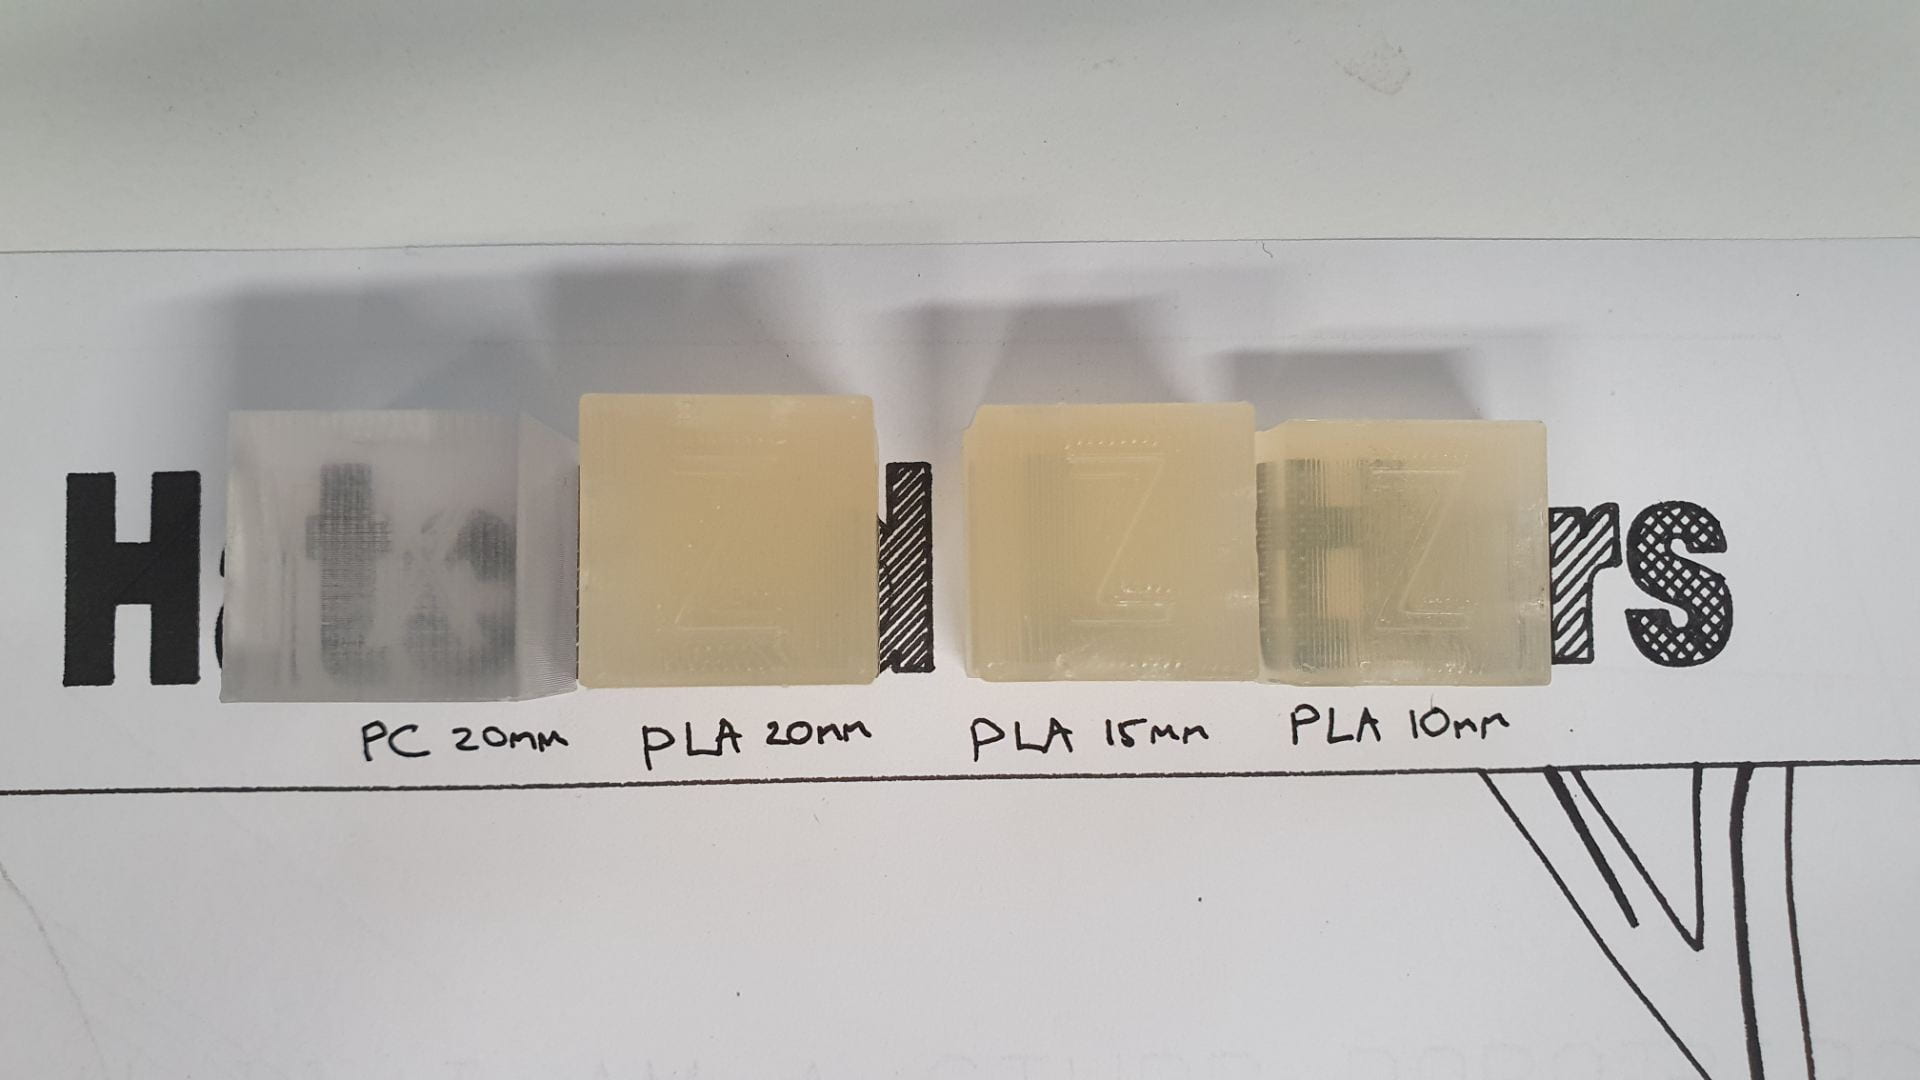 3D Printed cubes showing the transparency of Polycarbonate and various thicknesses of PLA prints